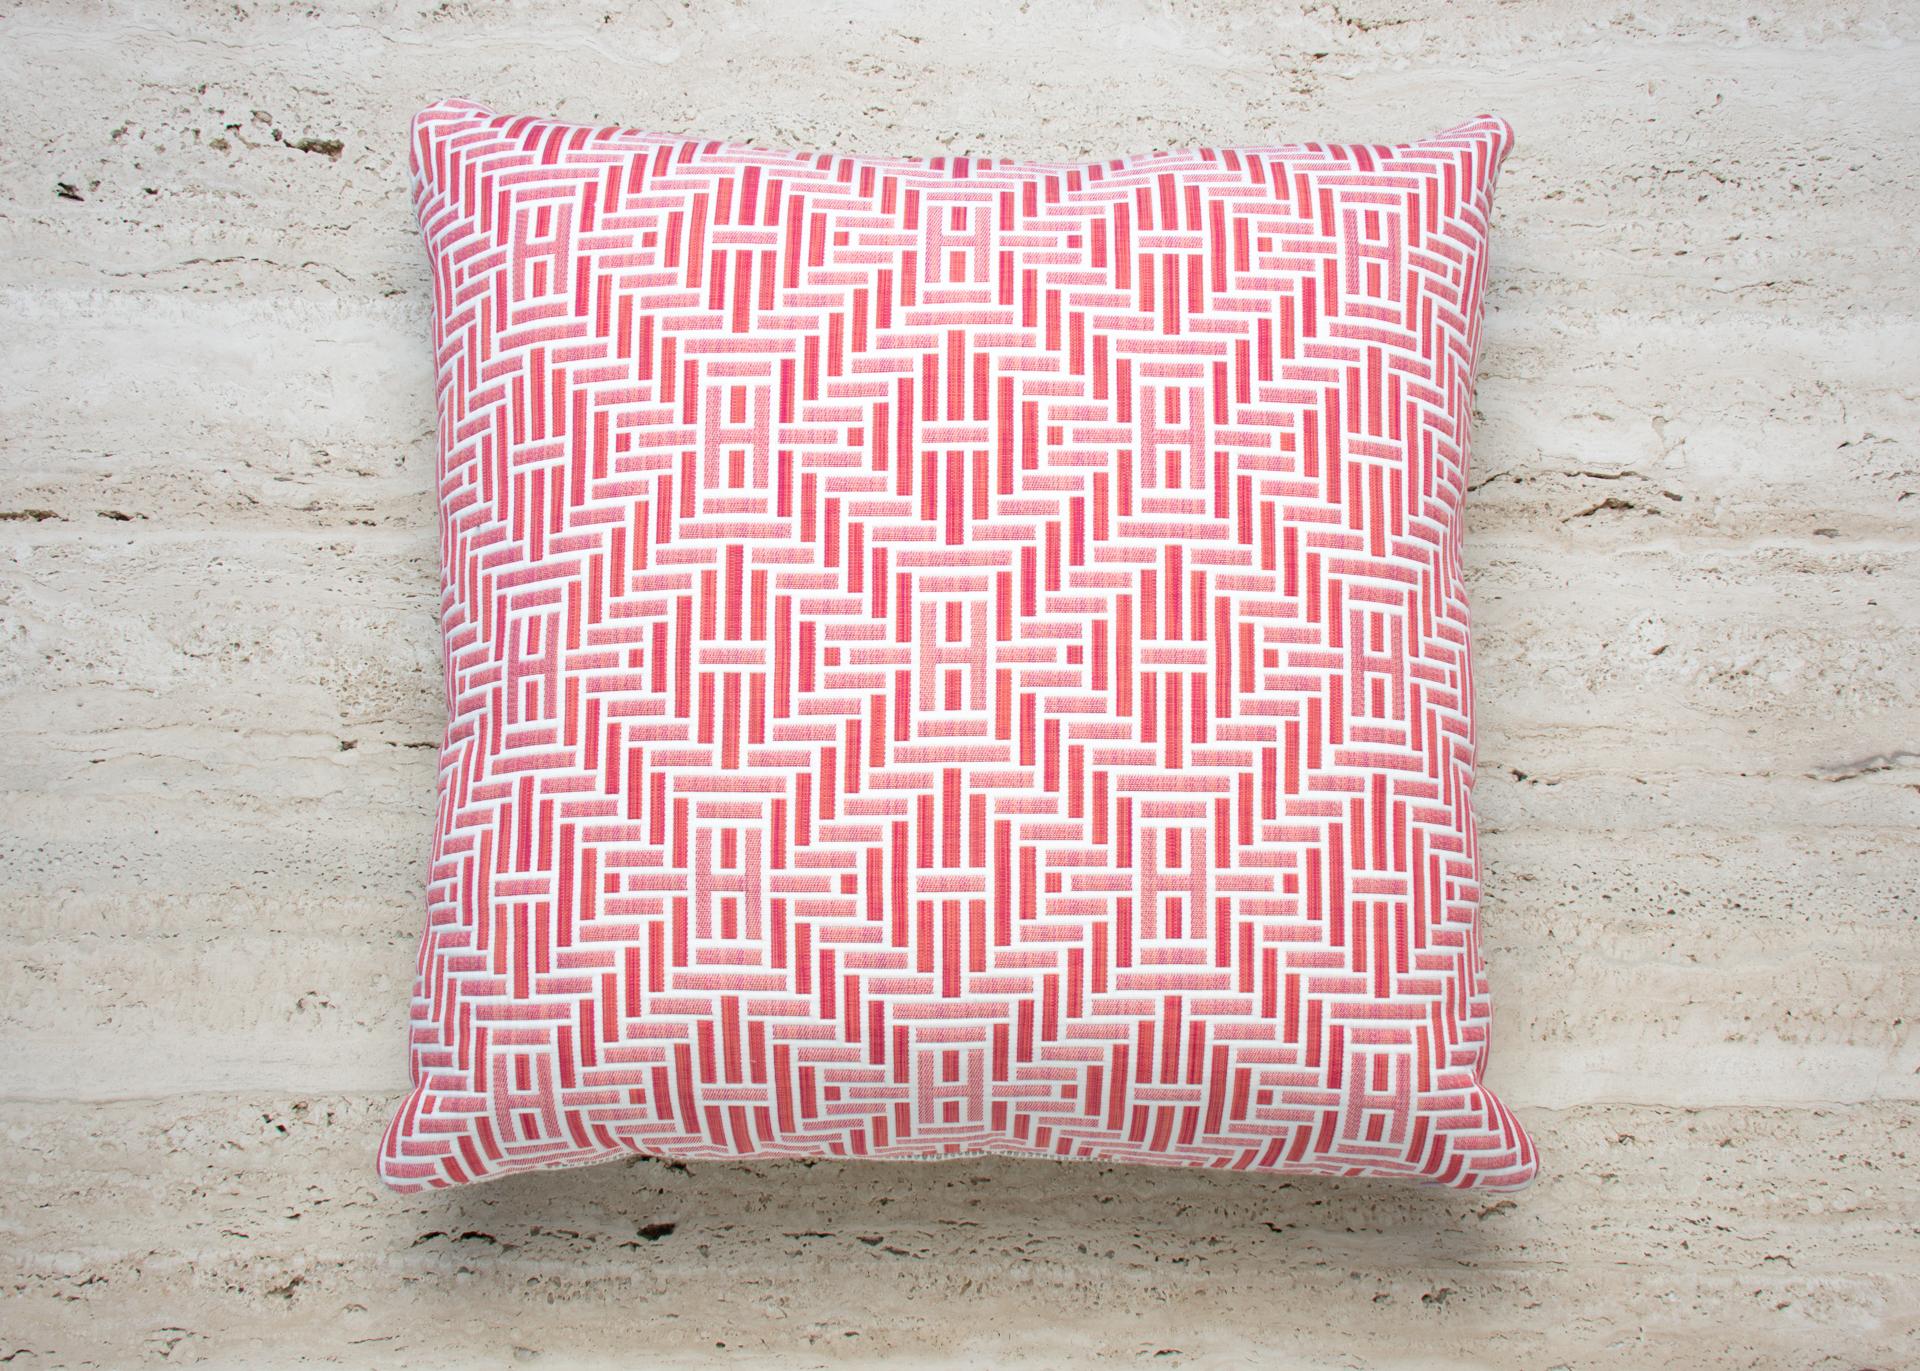 Introducing the exquisite limited edition Hermes Fabric H Losange pillow, a truly exceptional piece that encapsulates the essence of luxury, craftsmanship, and timeless beauty. Meticulously crafted using discontinued Hermes fabrics, these pillows